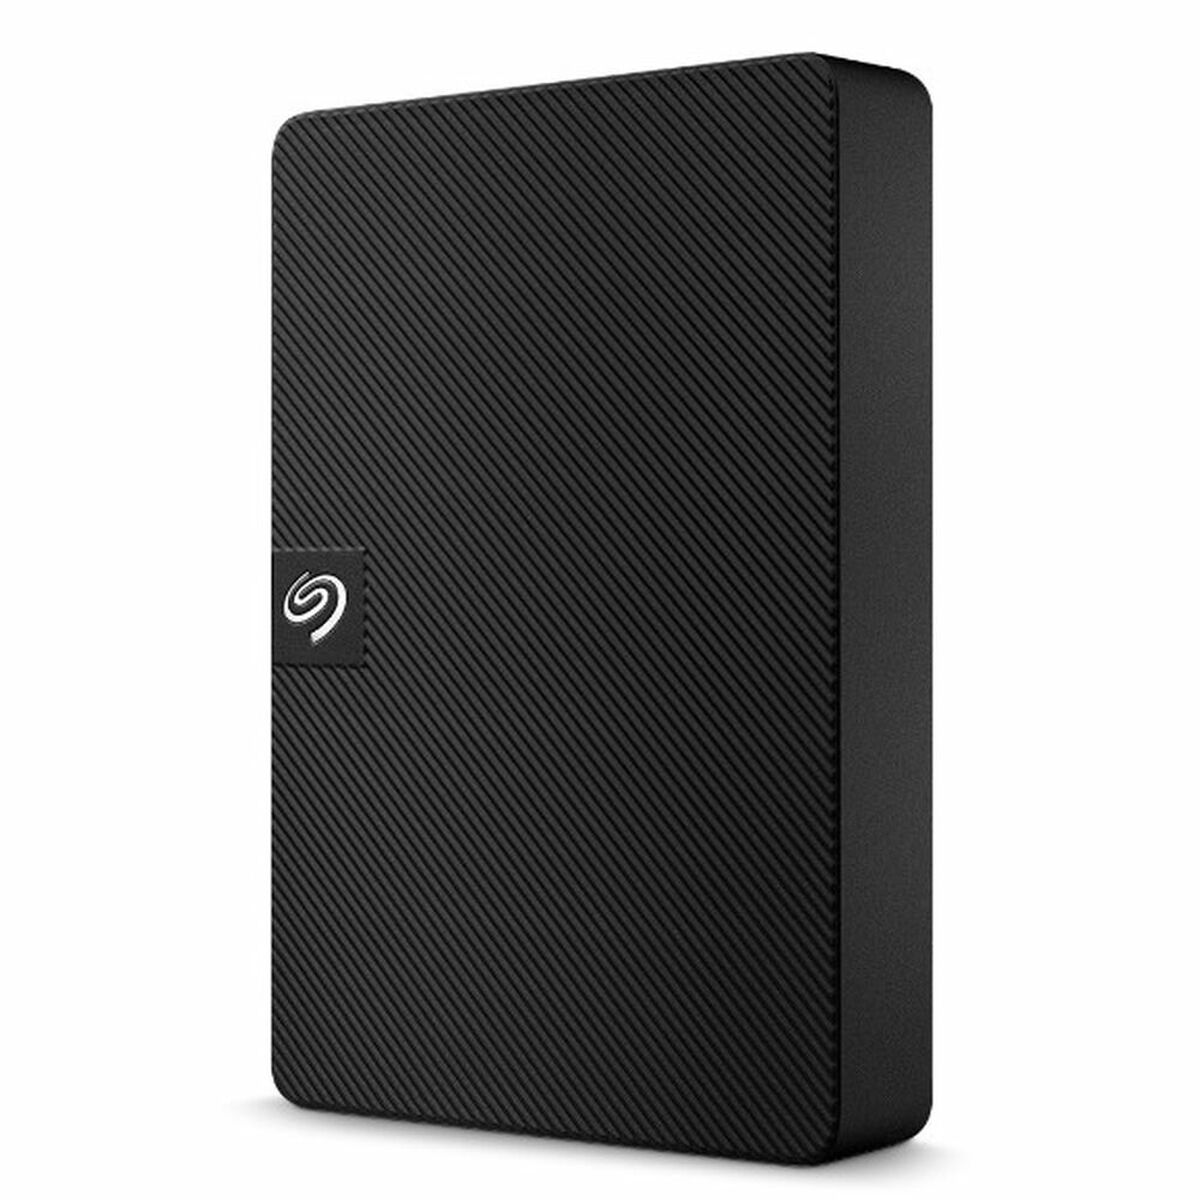 Hard disk Extern Seagate EXPANSION 1 TB